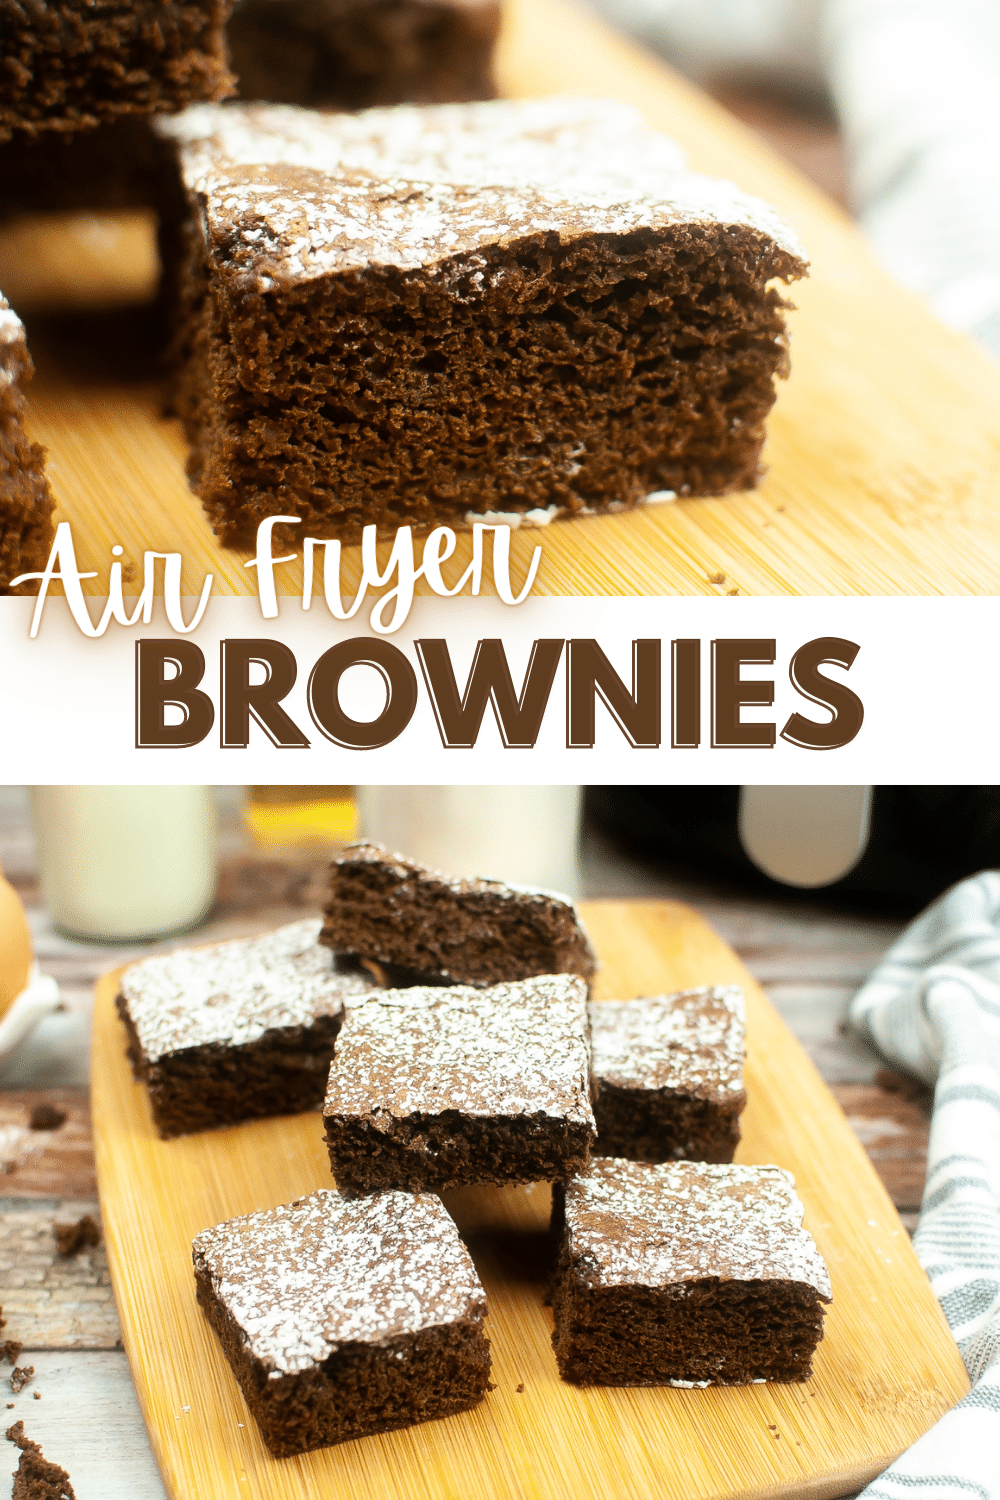 These Air Fryer Brownies are rich, fudgy, and perfectly crisp on the outside. They are made quickly with just a handful of ingredients. #airfryerbrownies #brownierecipe #airfryerdessertrecipes #fudgybrownies #airfryerrecipe via @wondermomwannab